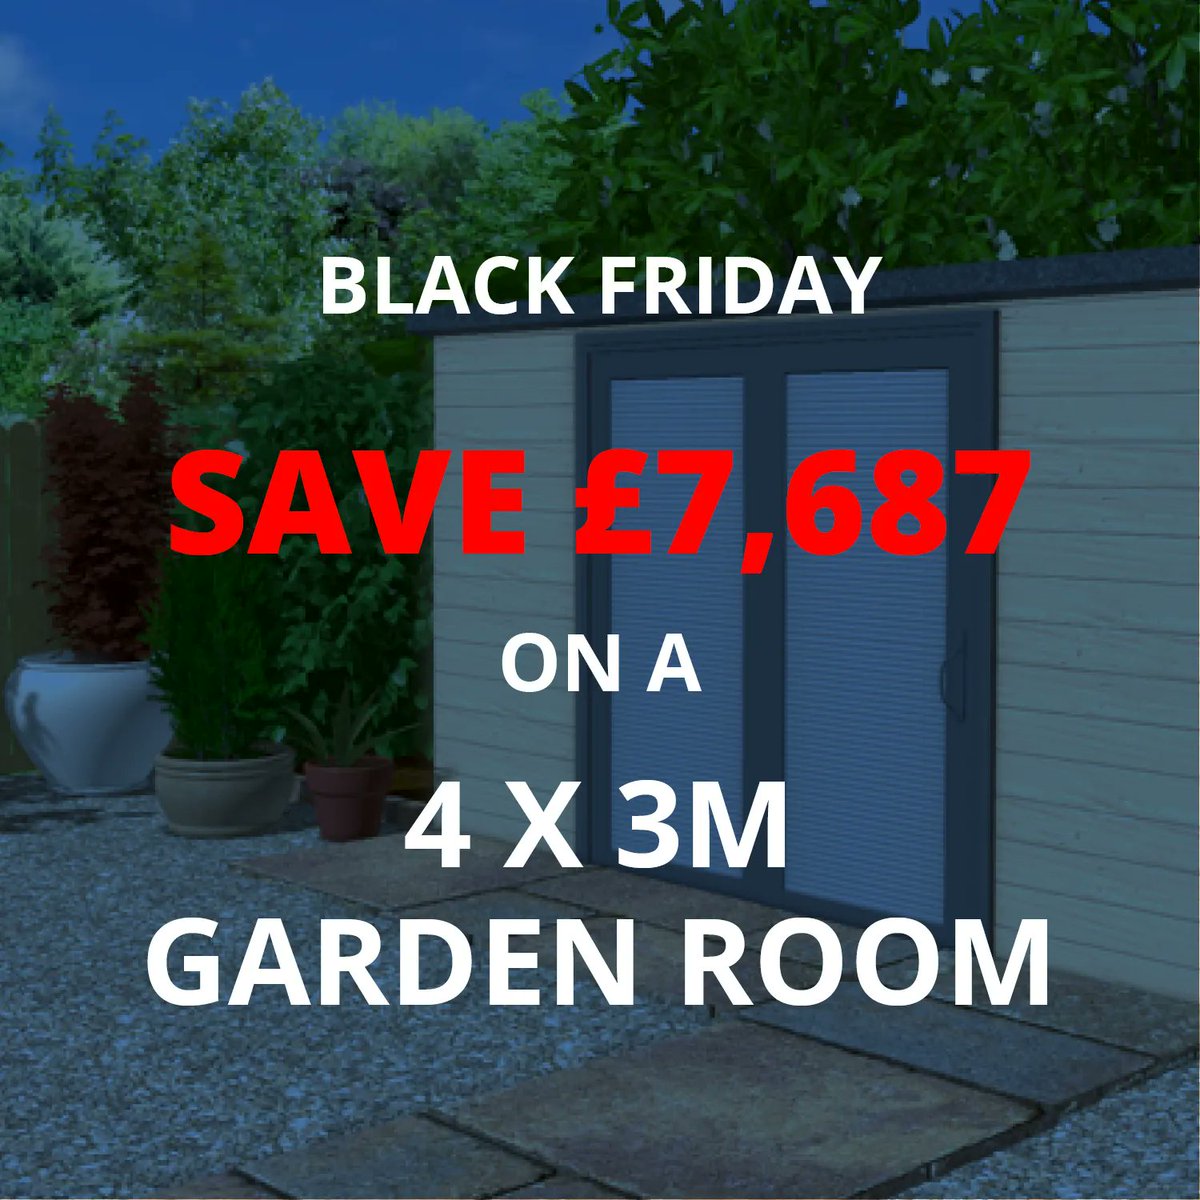 *** BLACK FRIDAY MADNESS *** Grab yourself an amazing #blackfriday deal and save over £7,600 on a new #gardenroom. This Friday we are offering 12 garden rooms at the reduced price of just £16,308 (+ vat). For details look at our website: buff.ly/3fRpCjD